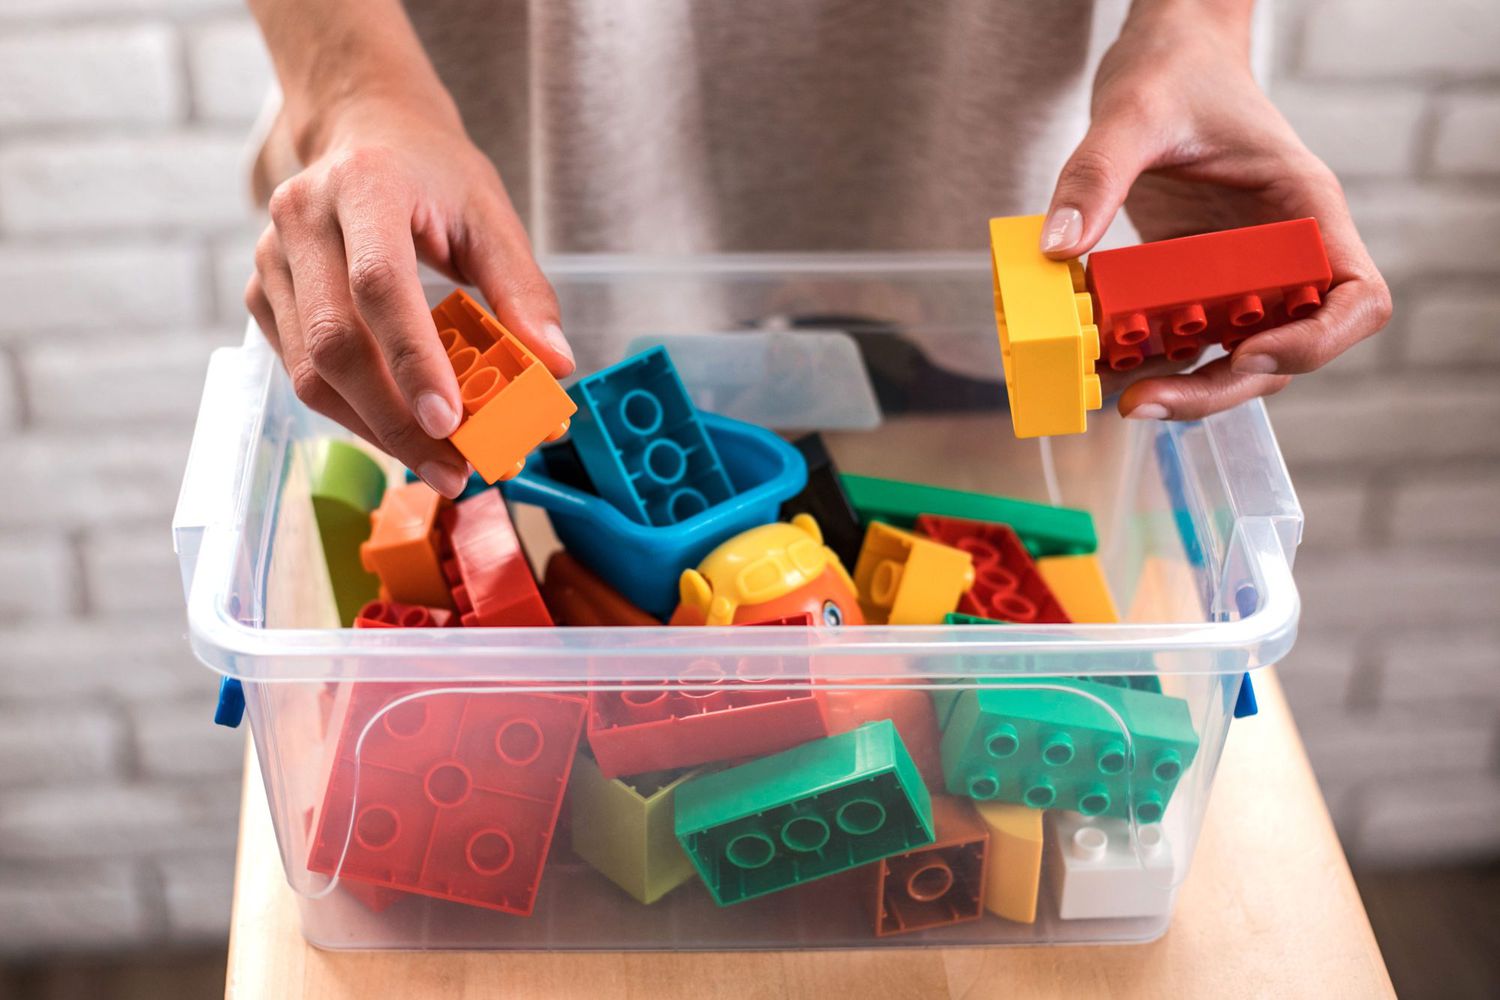 Woman's hands putting colored blocks into plastic box. Close up.